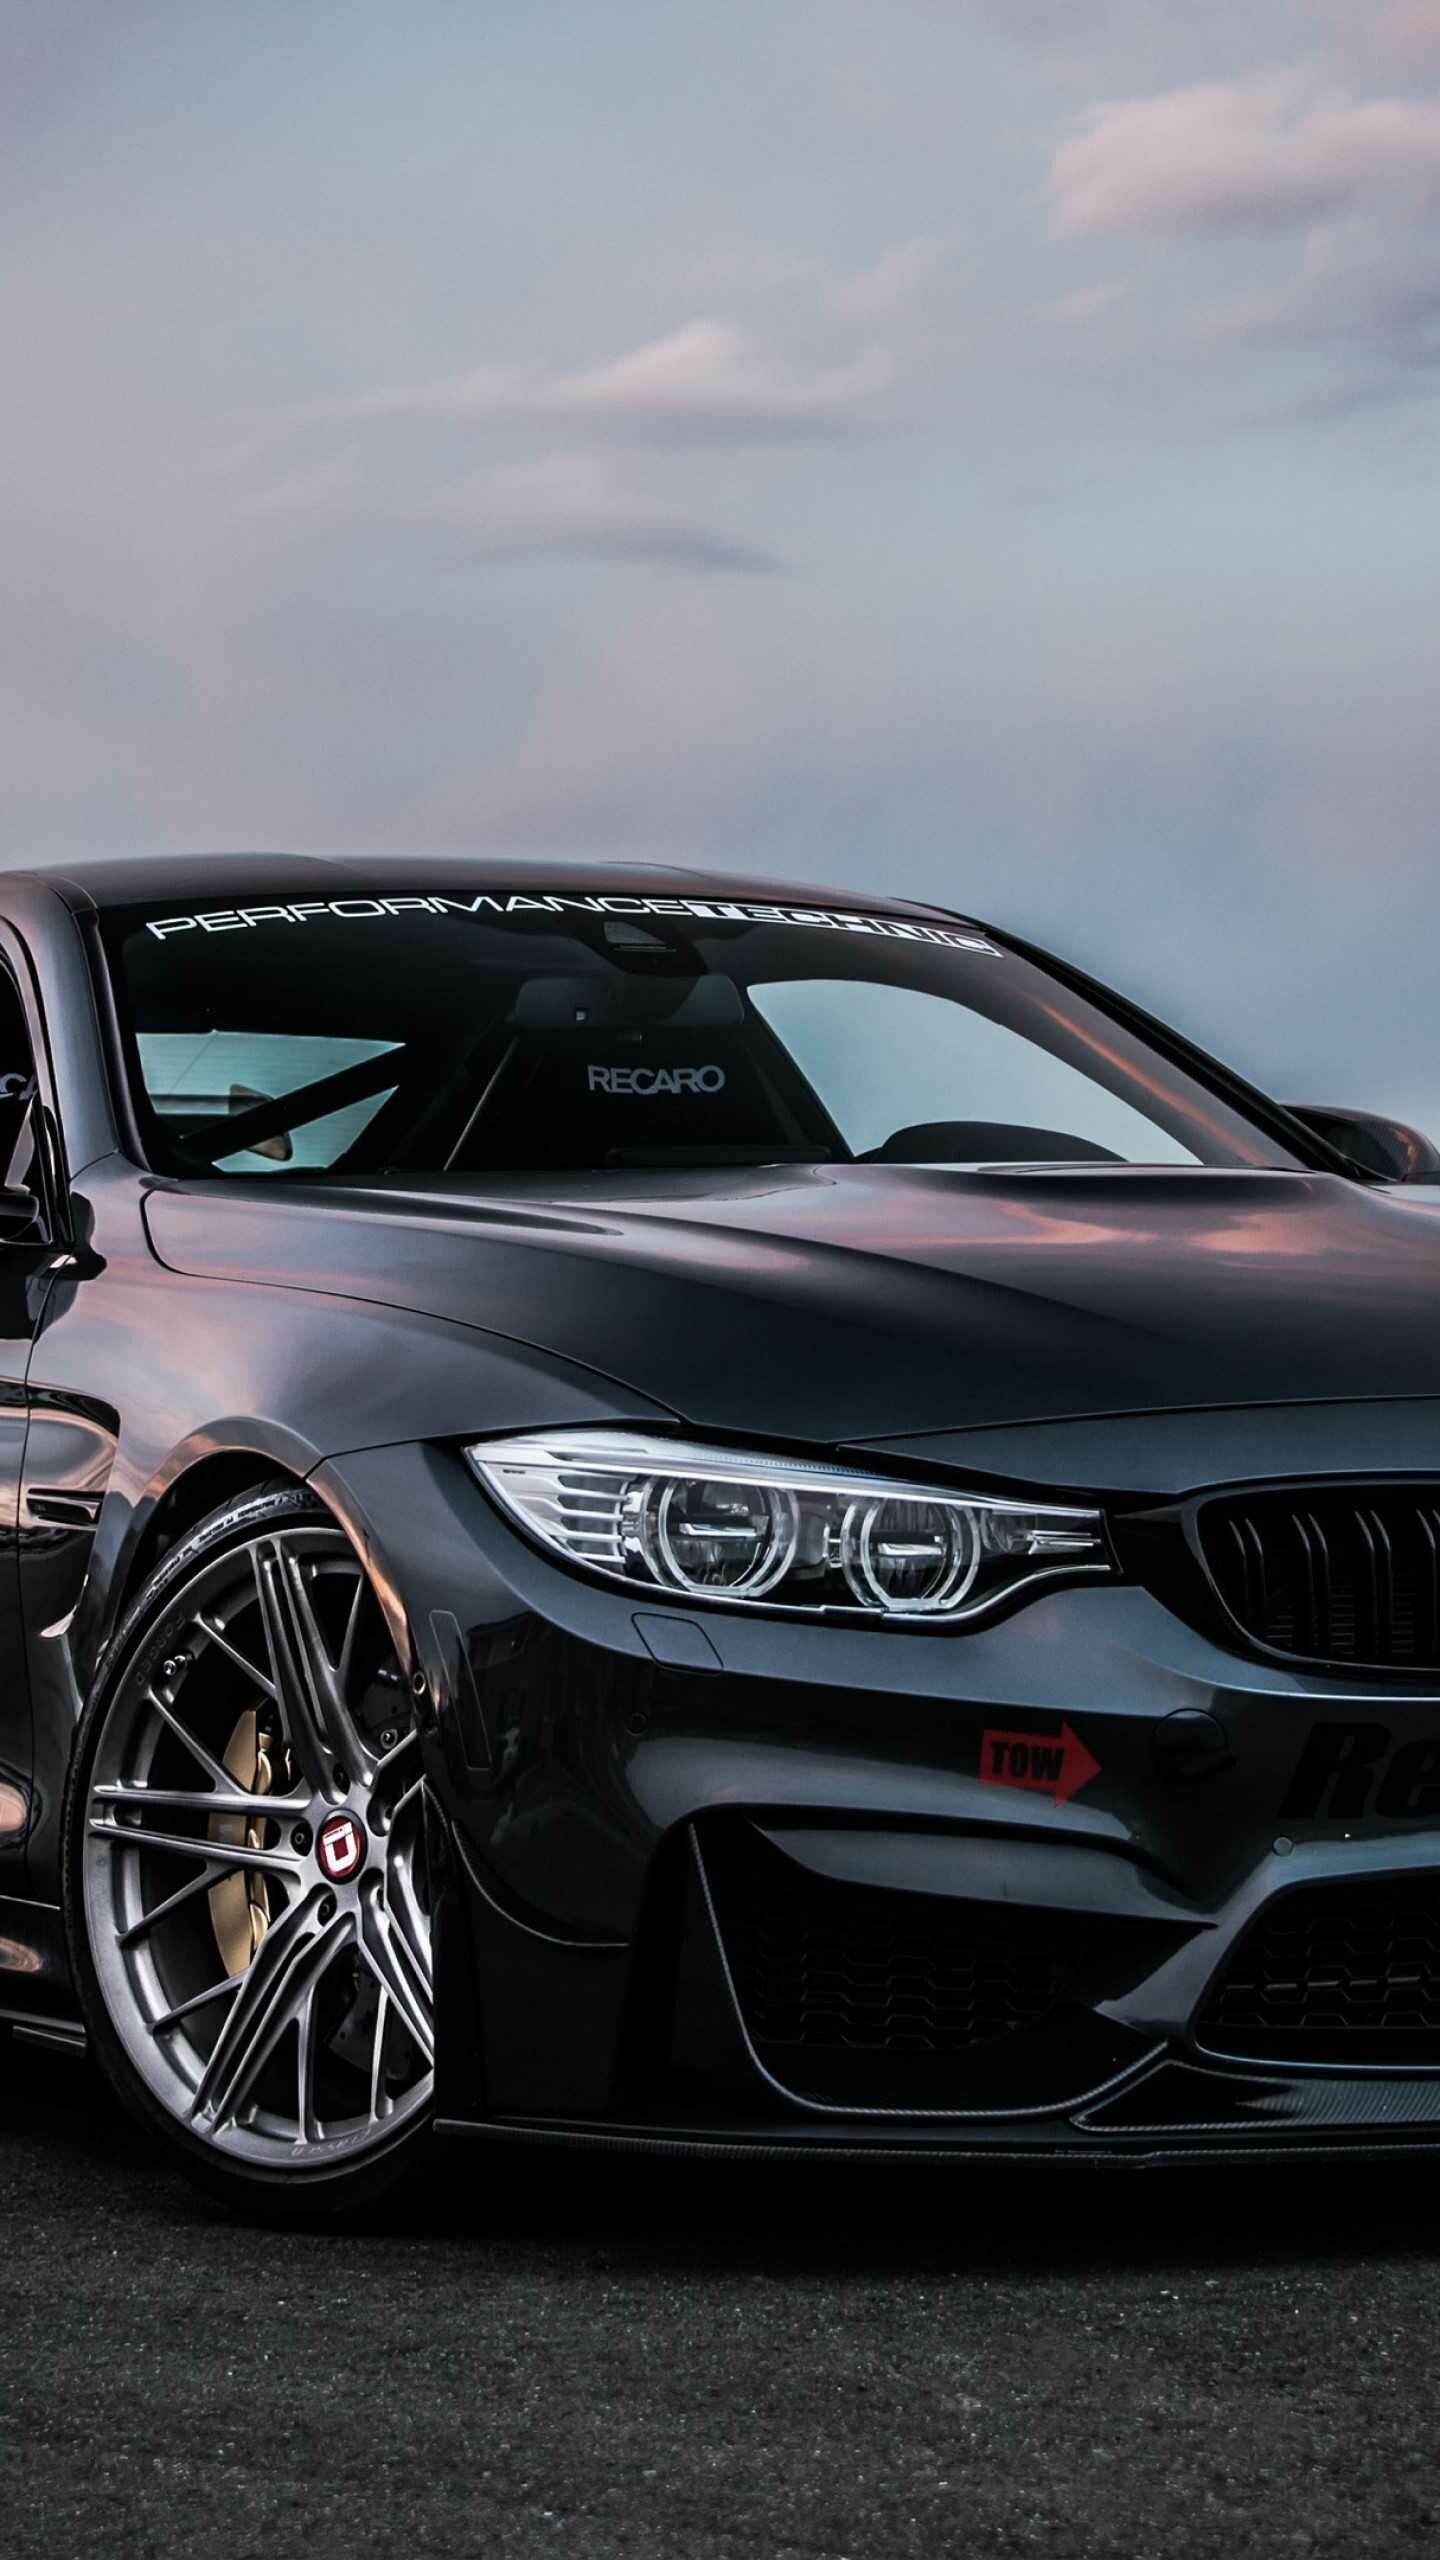 BMW: One of today's most successful luxury car brands, Known for technology and style. 1440x2560 HD Background.